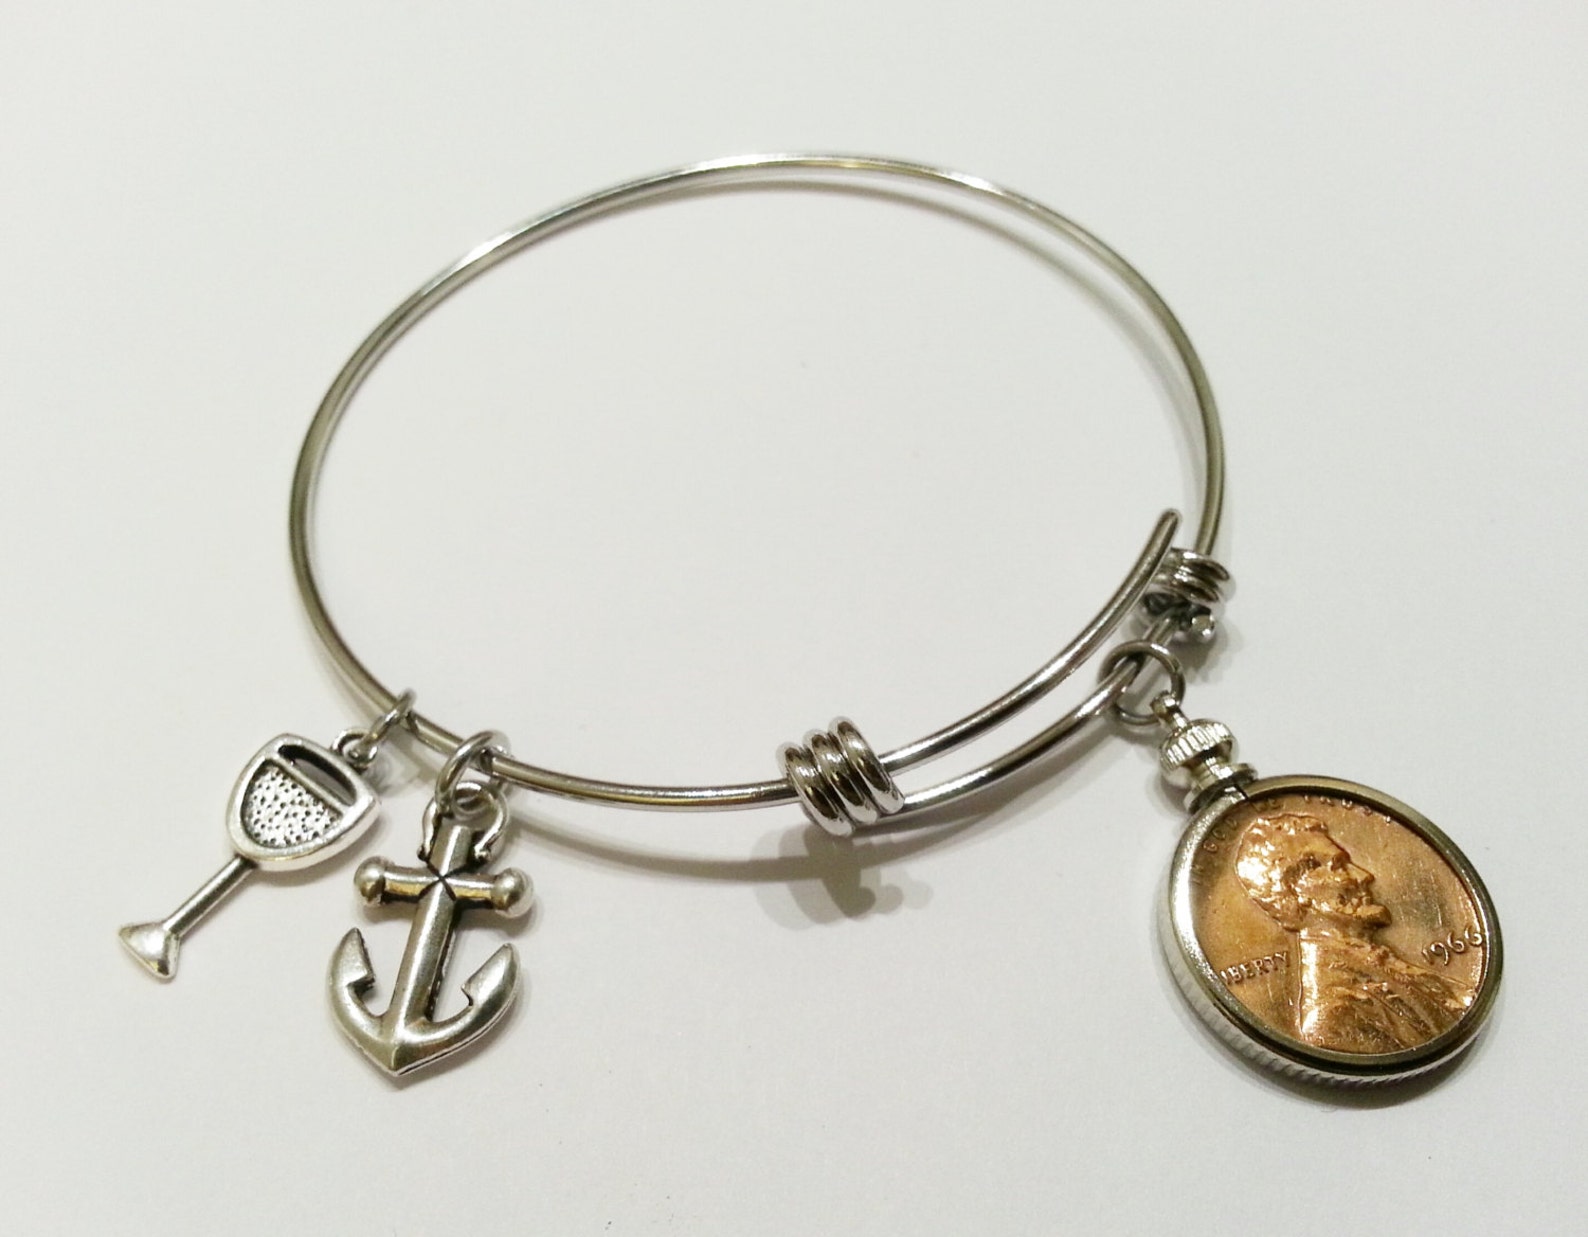 add a charm - ballet slipper ballet shoes dancing ballerina charm - listing is for one charm